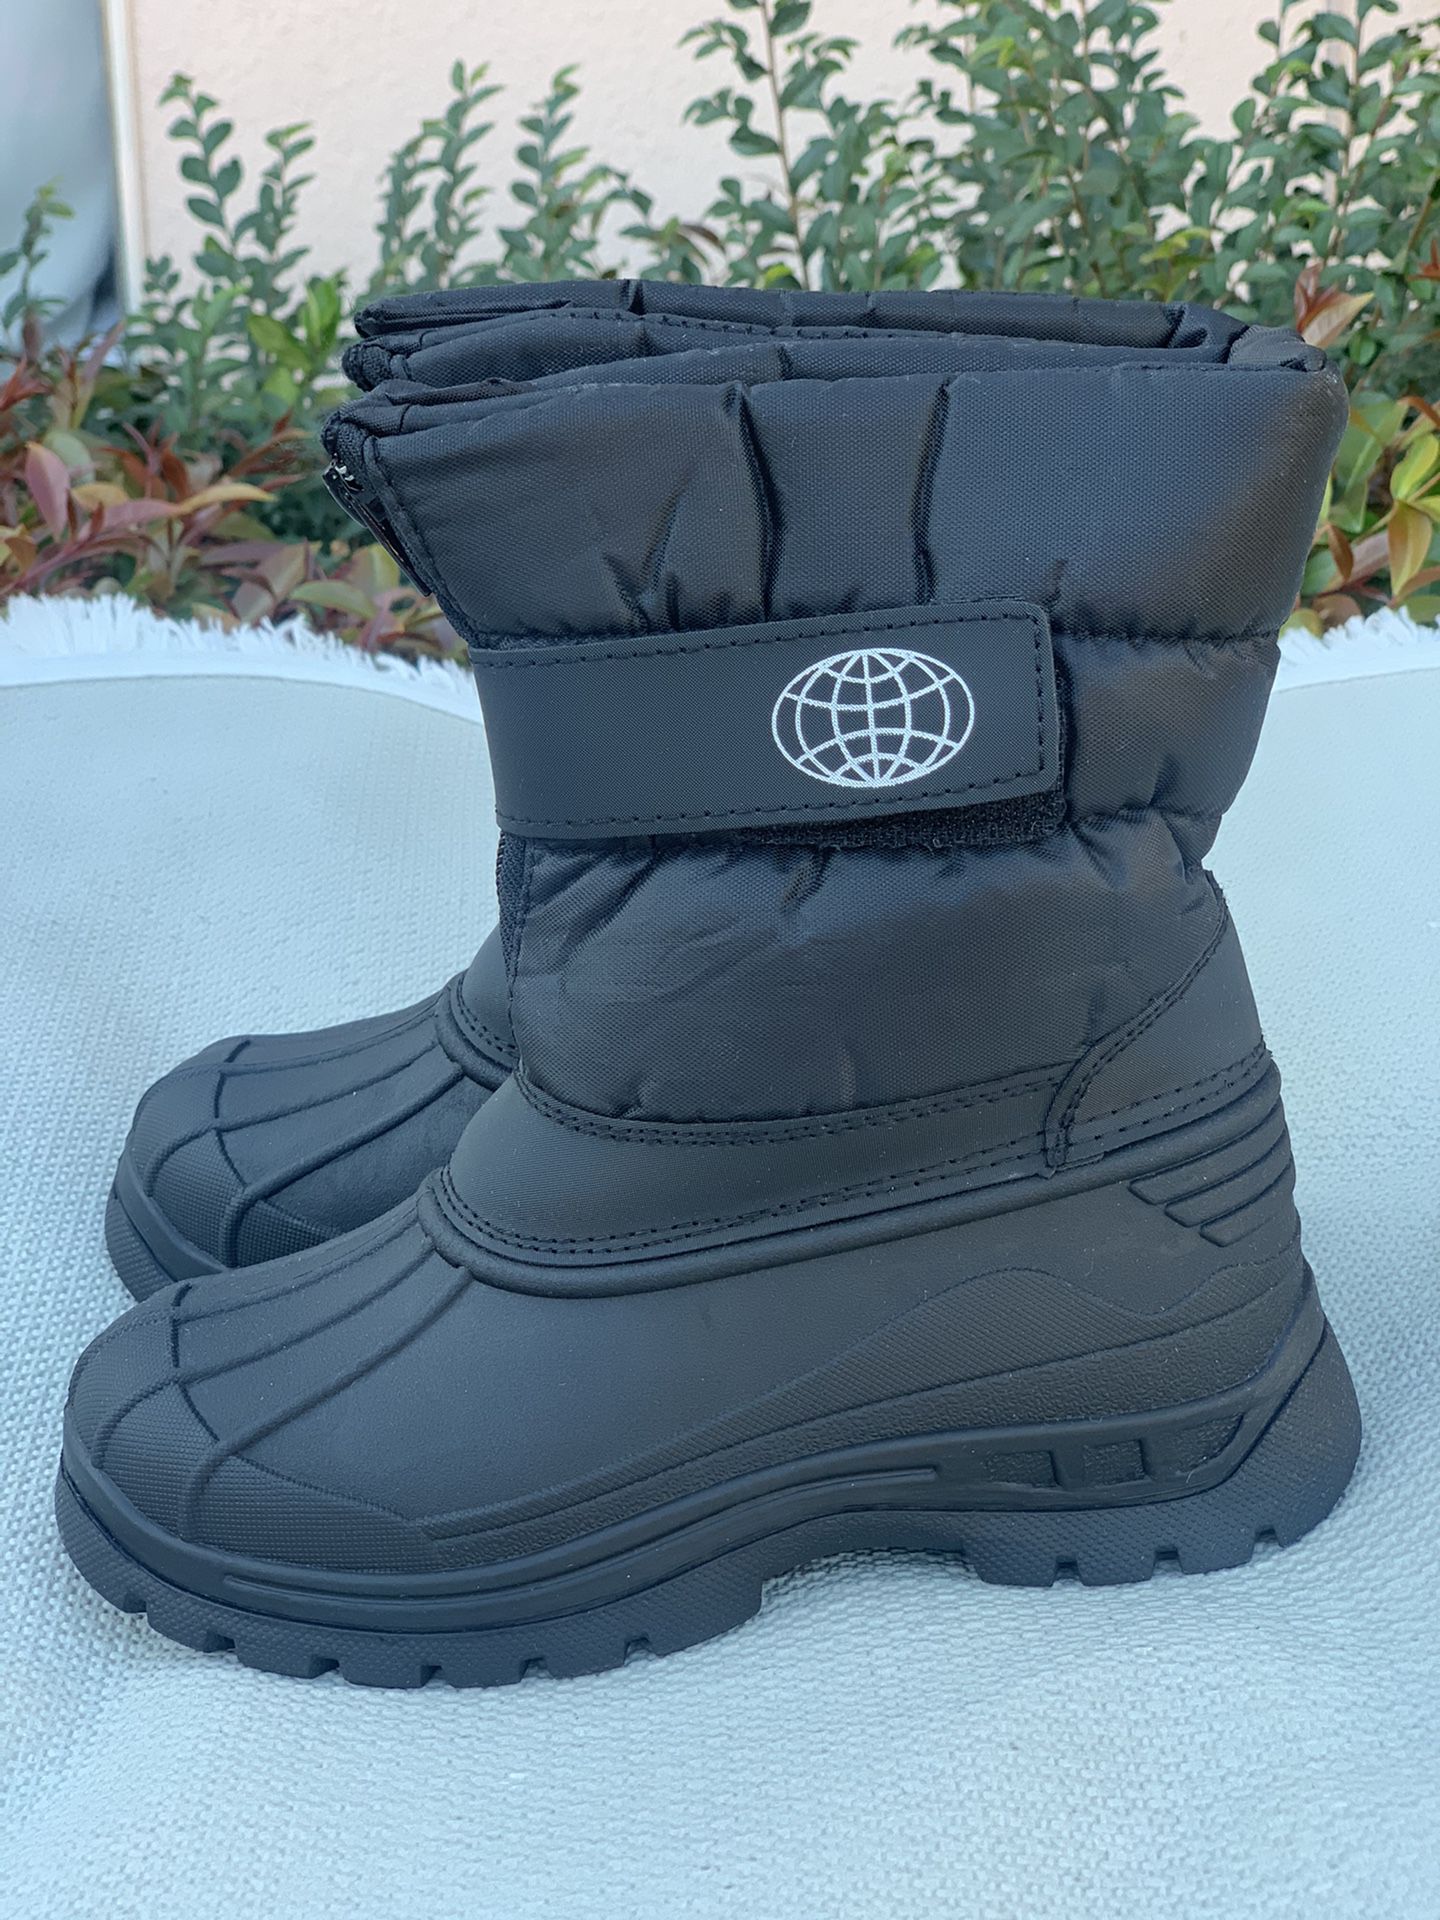 Snow boots for kids sizes 11,12,13